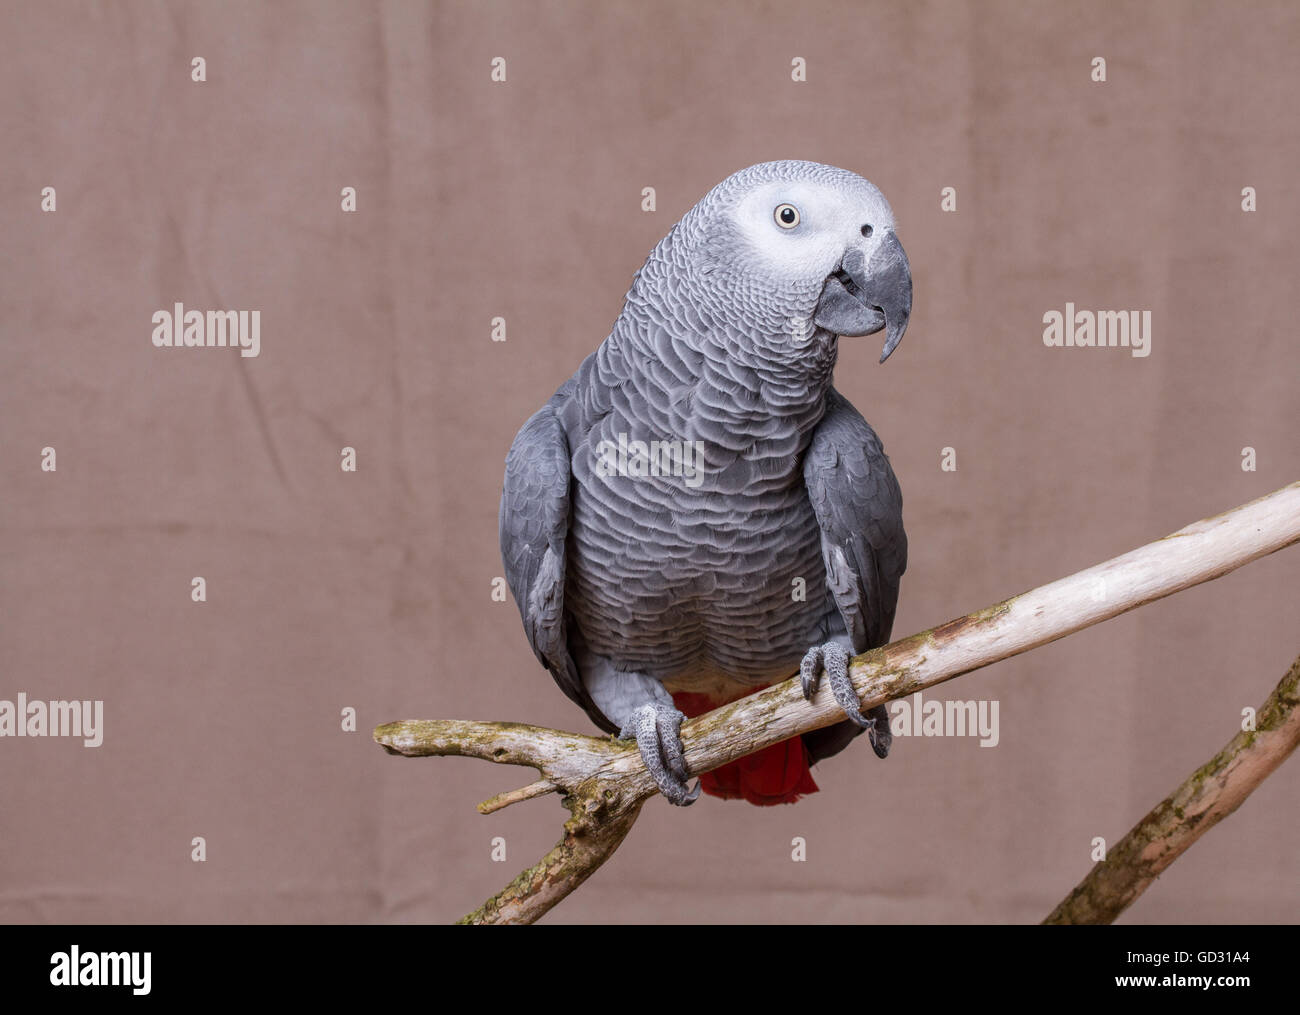 African Grey Parrot stood on natural wooden perch Stock Photo